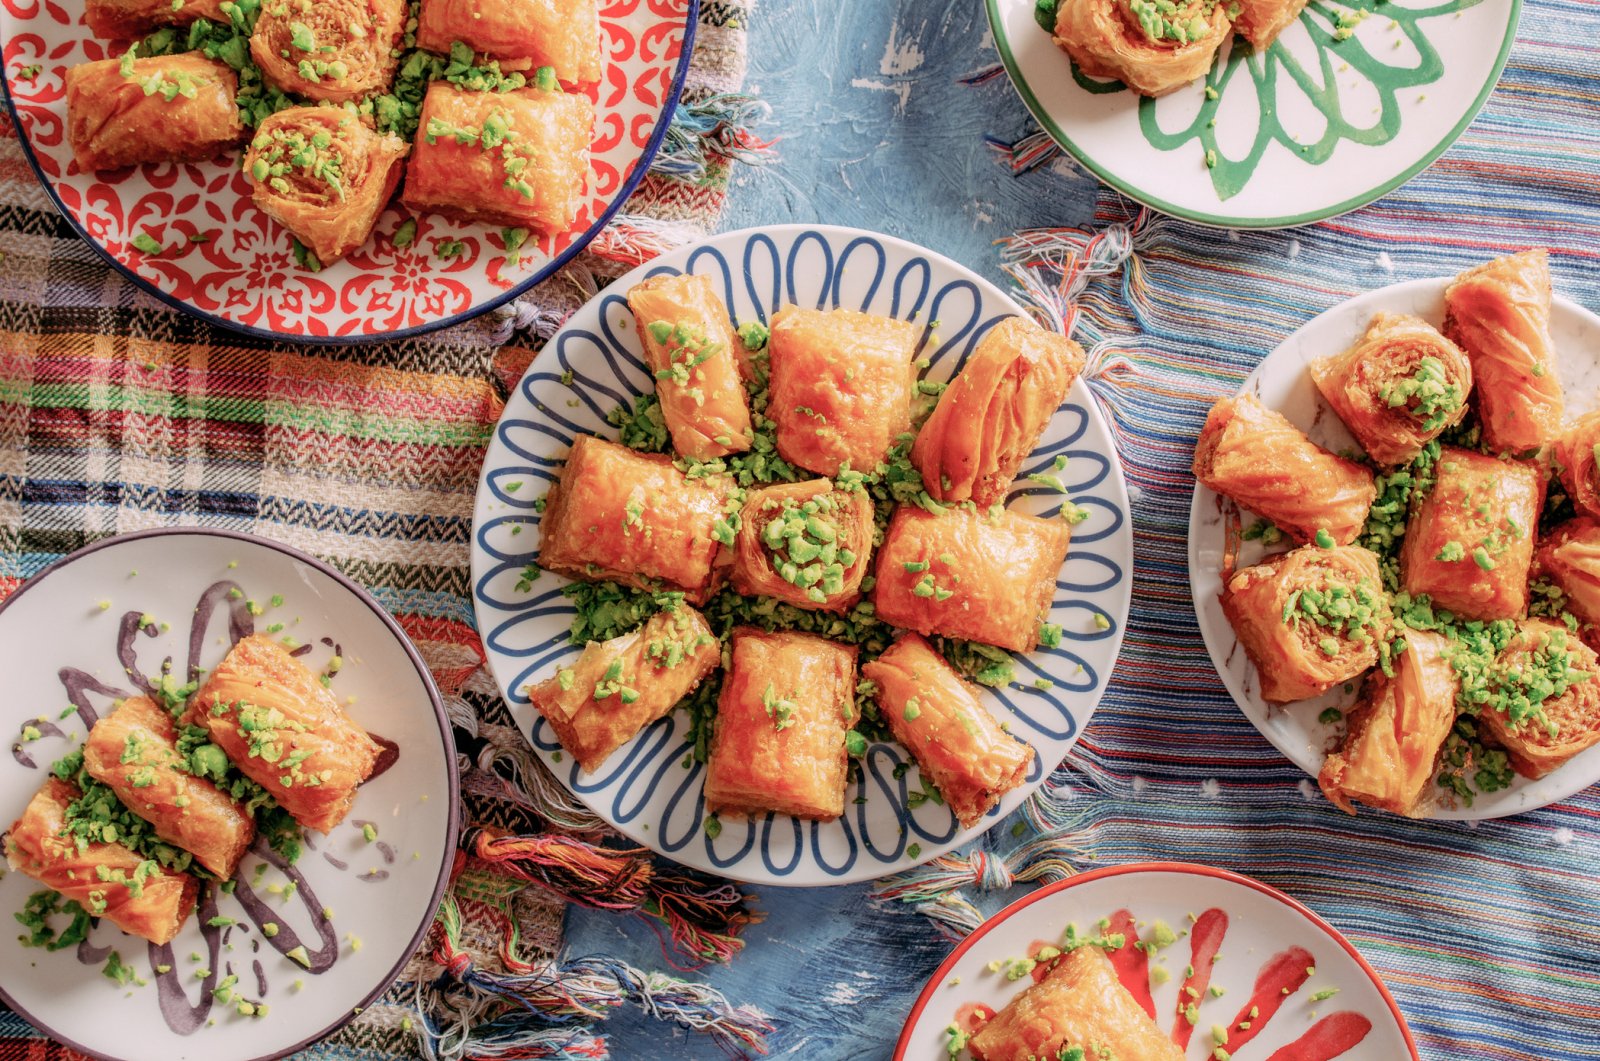 Most would agree that baklava is the ultimate treat of Ramadan gatherings. (iStock Photo)